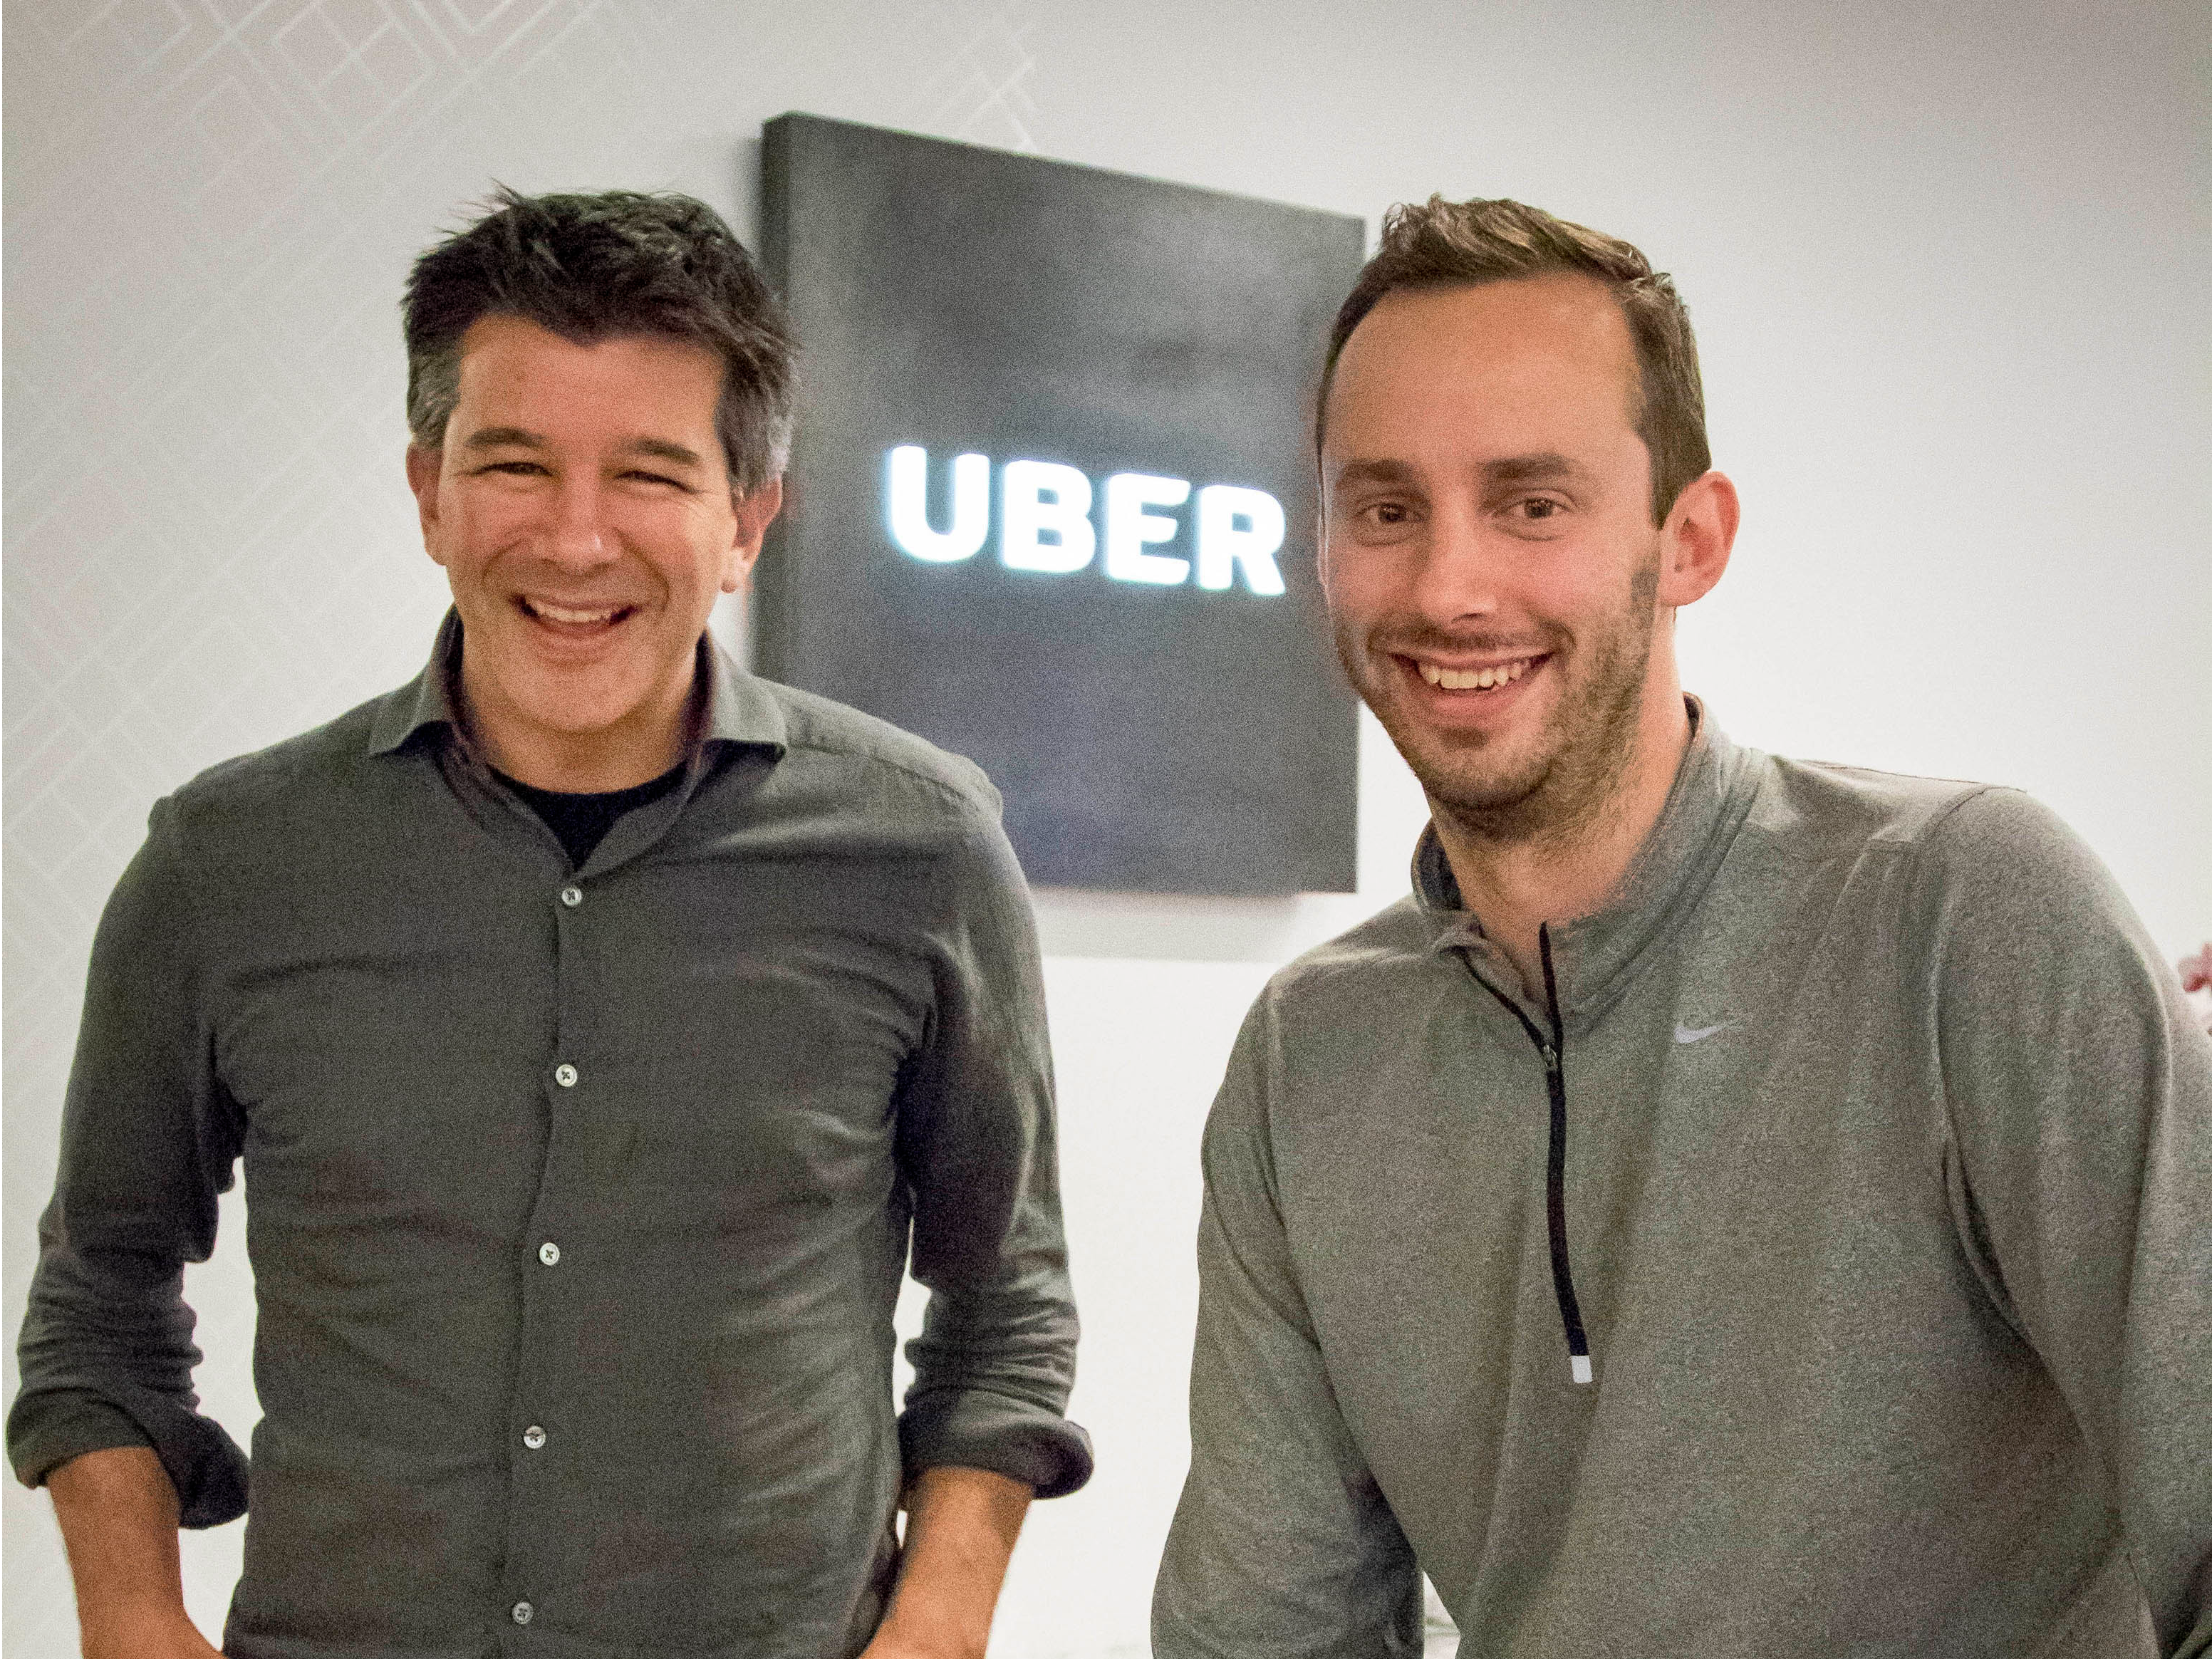 Google's self-driving-car company has sued Uber for stealing its technology - Business Insider